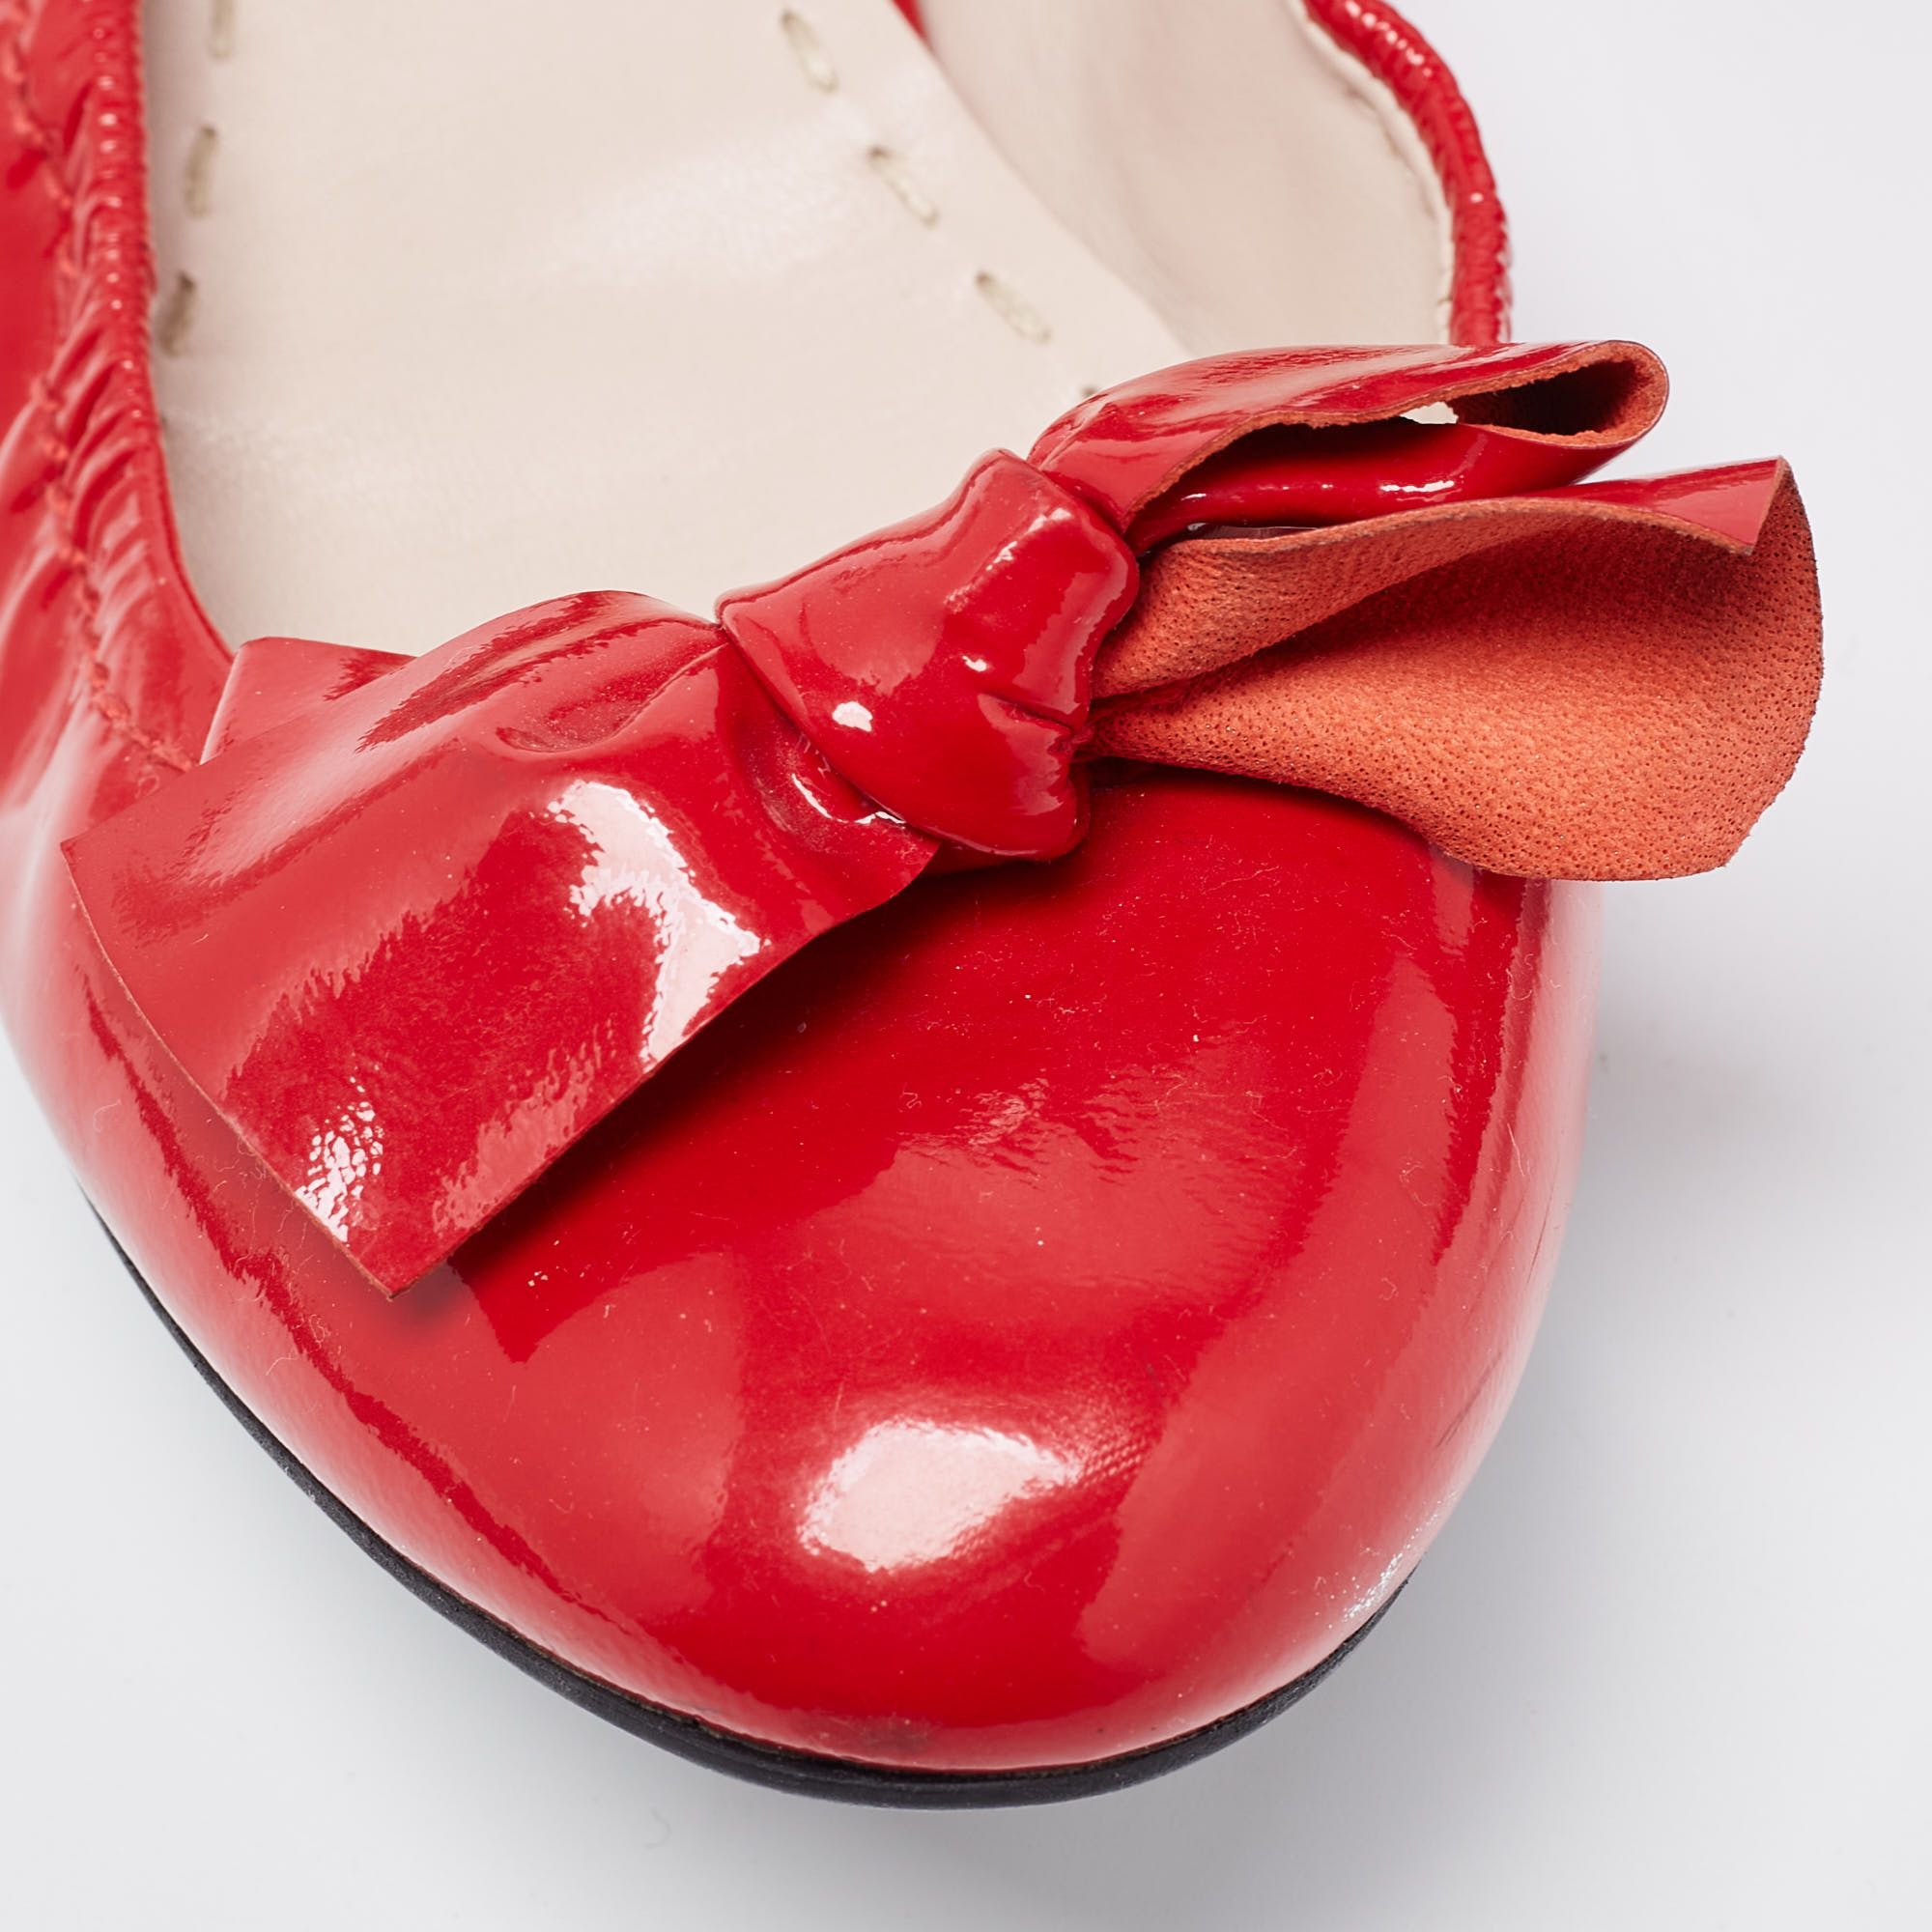 Miu Miu Red Patent Leather Crystal Embellished Bow Scrunch Ballet Flats Size 38